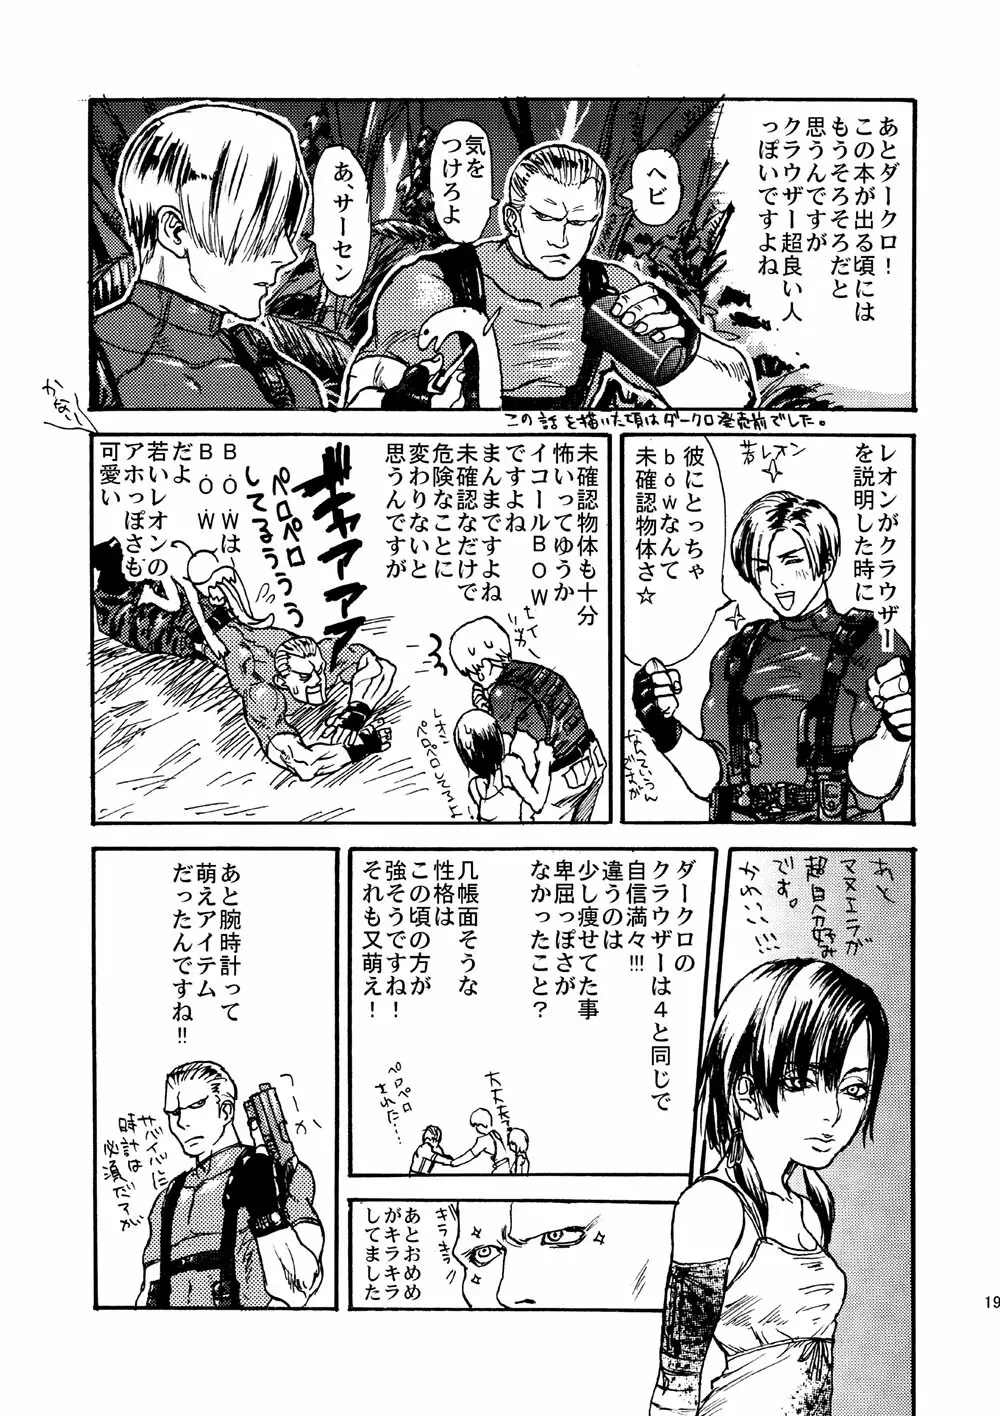 VILLAGE OF FEAR/バイオ４同人誌ｗｅｂ再録 Page.16